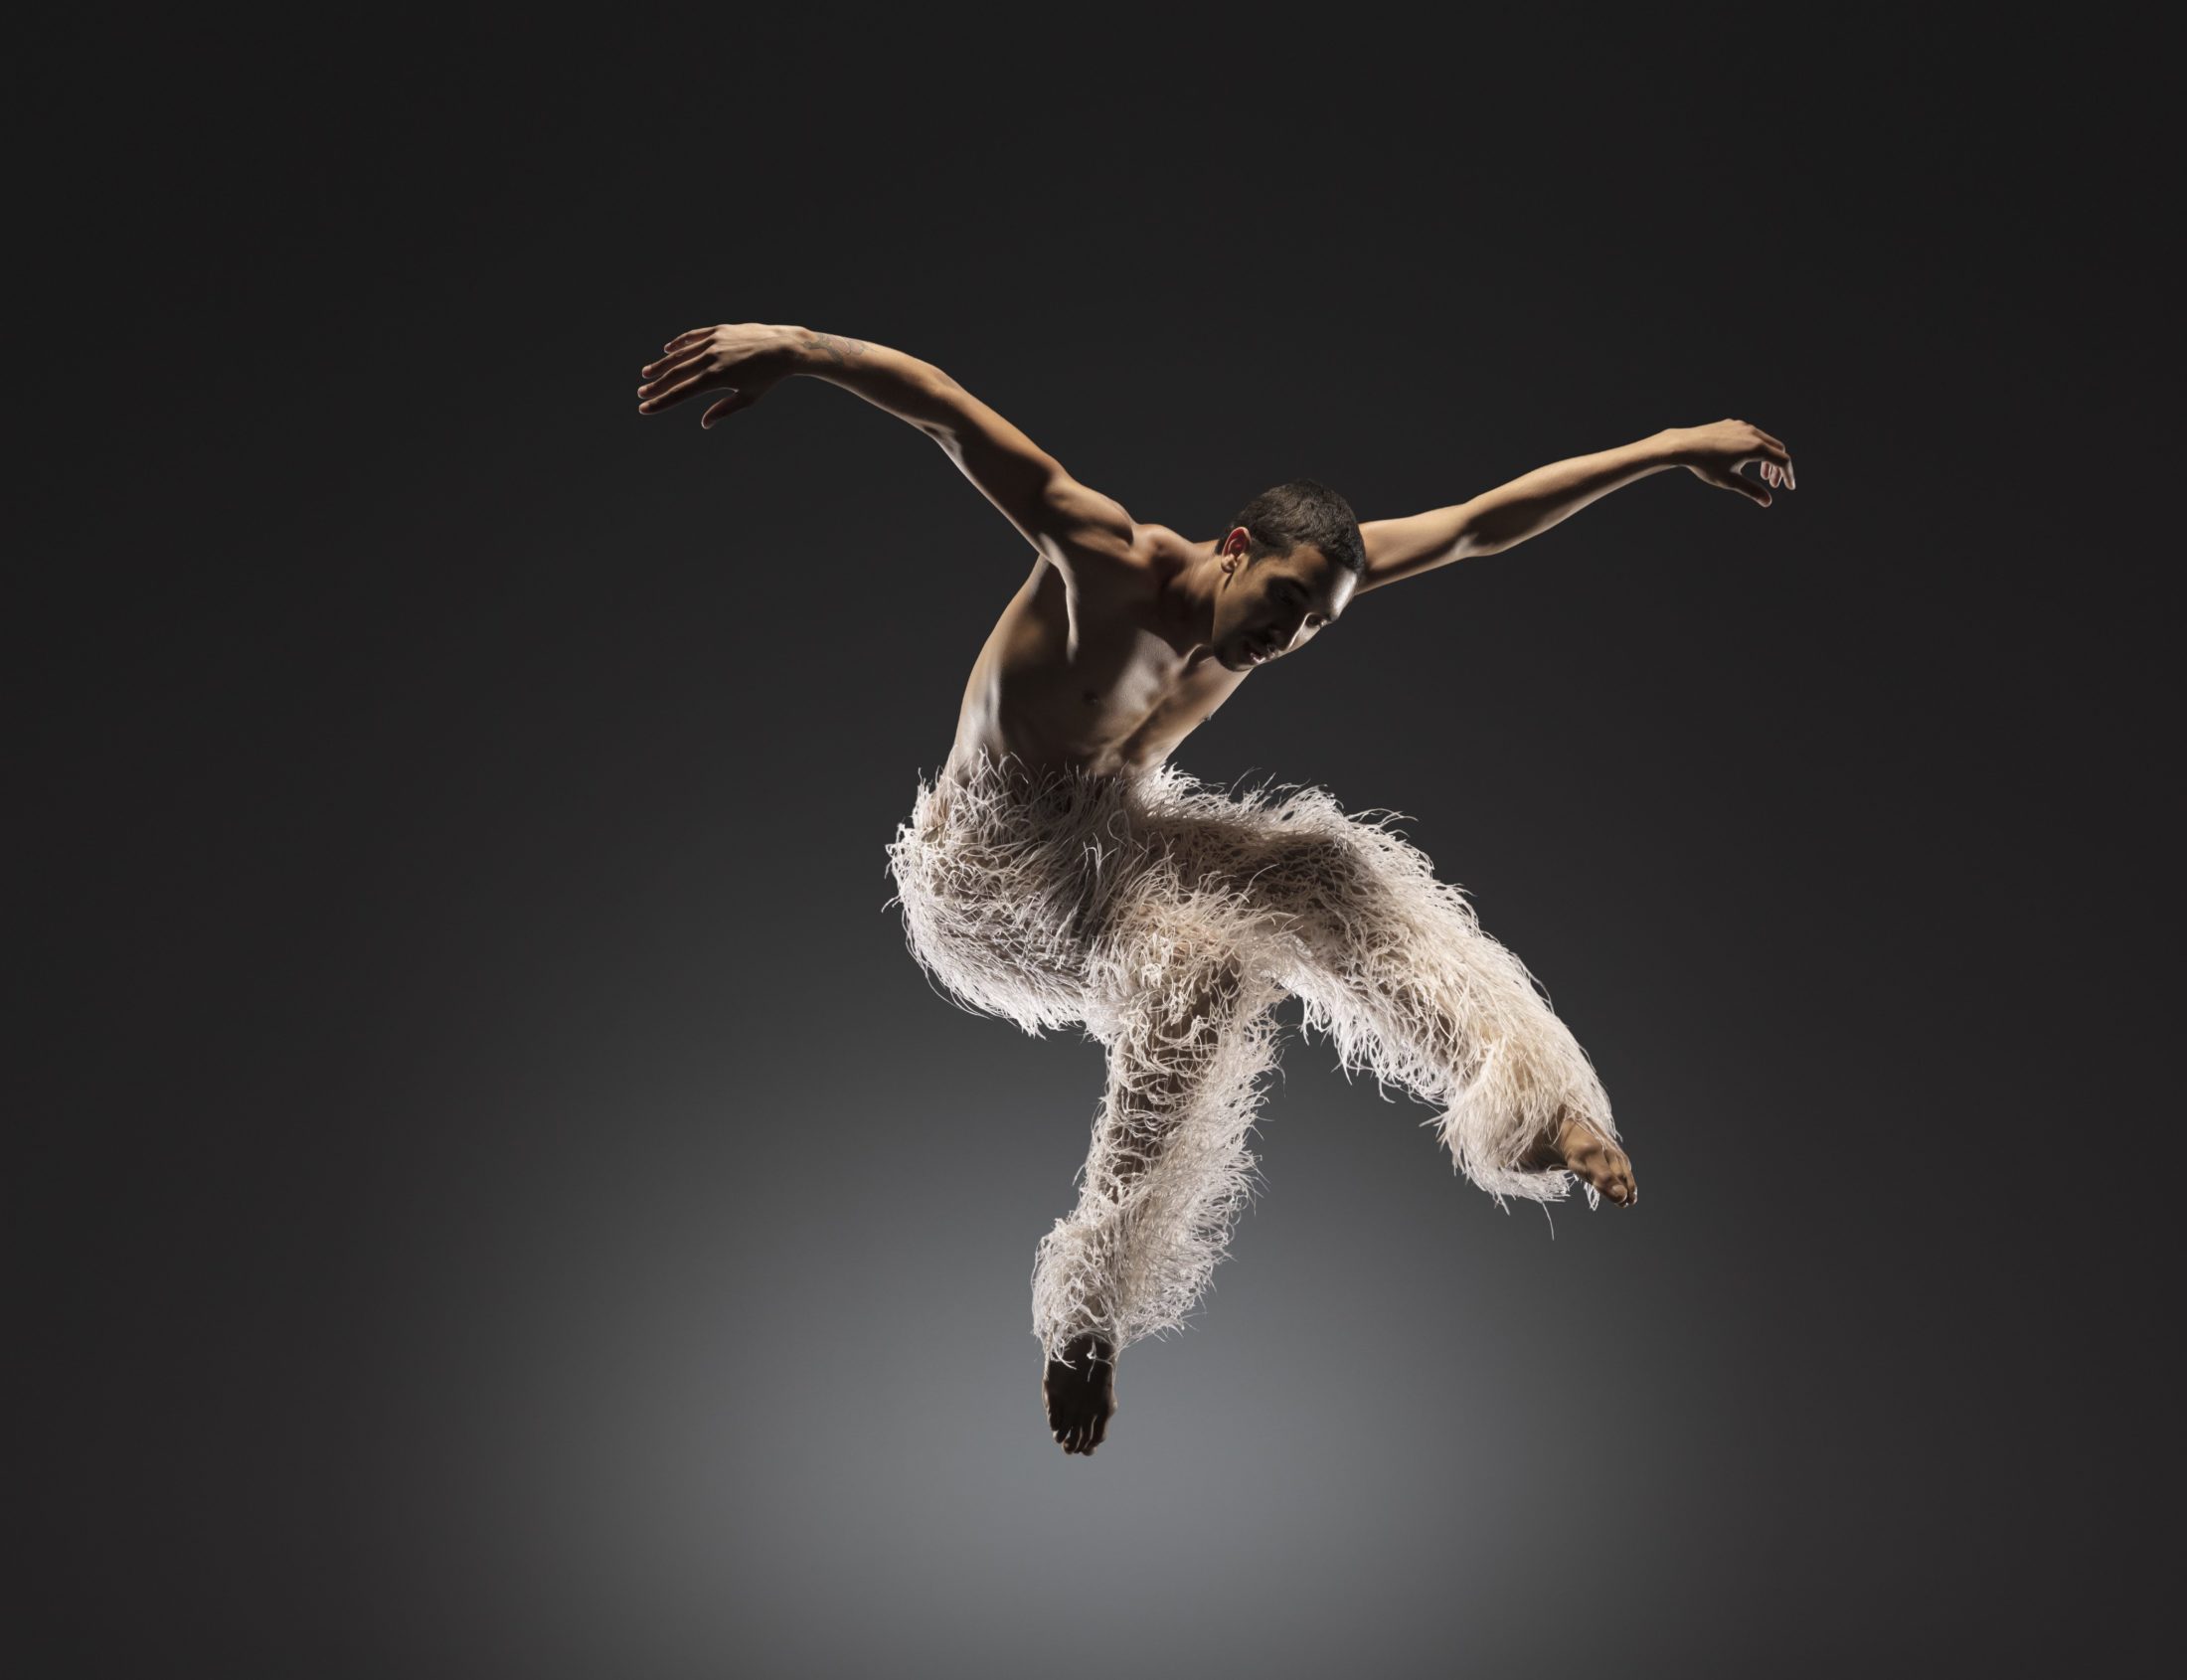 LINES Ballet company artist Shuaib Elhassan jumping against a black/gray background